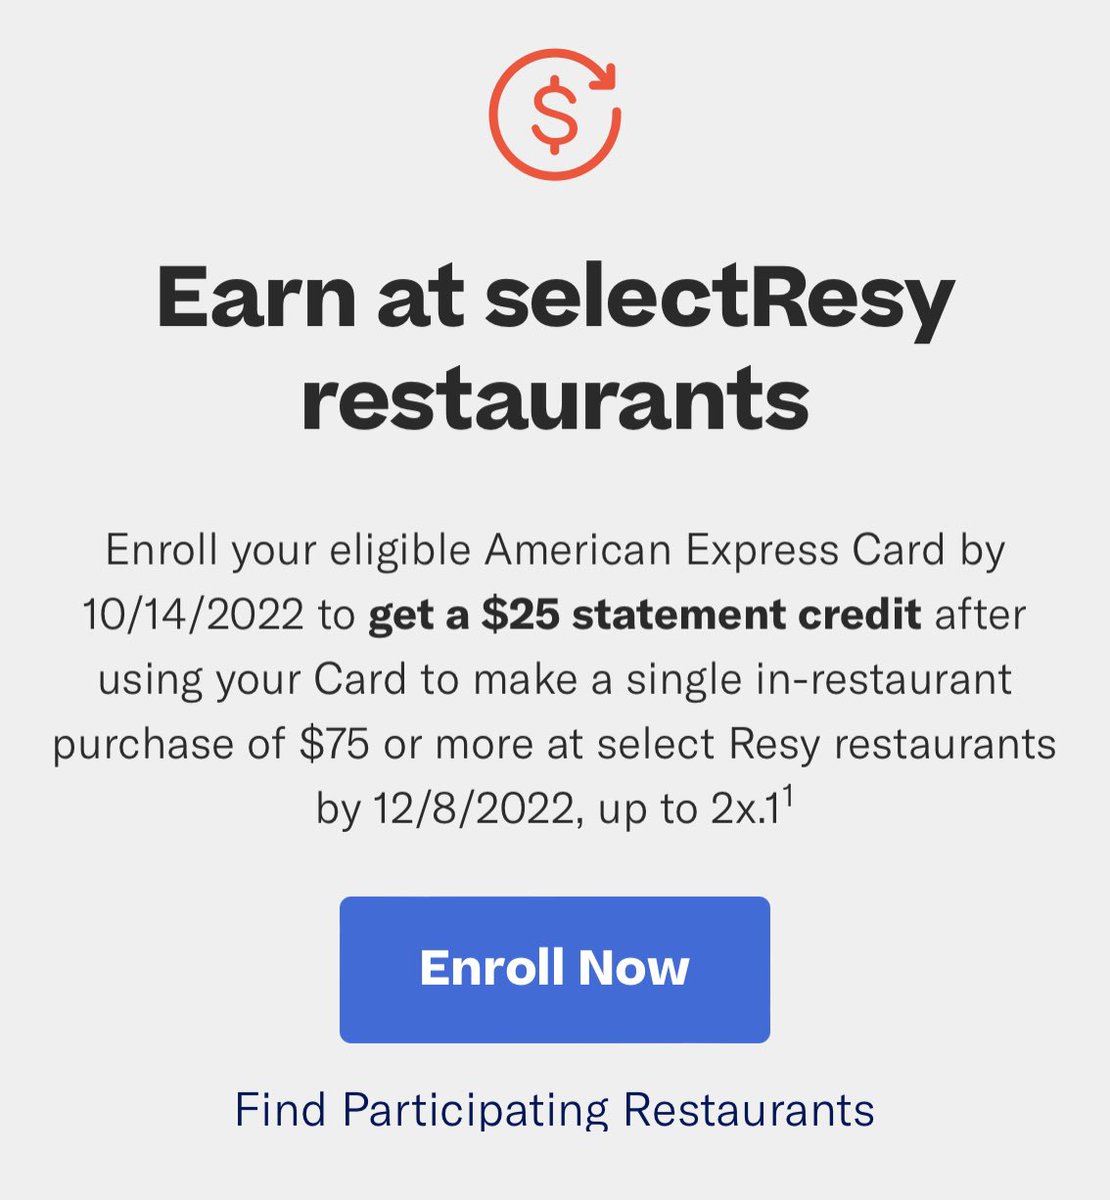 Spend $75 get $25 off when you add this offer on your AmEx account! Check your office, must enroll by 10/14 #MemberWeek resy.com/amex-member-we…